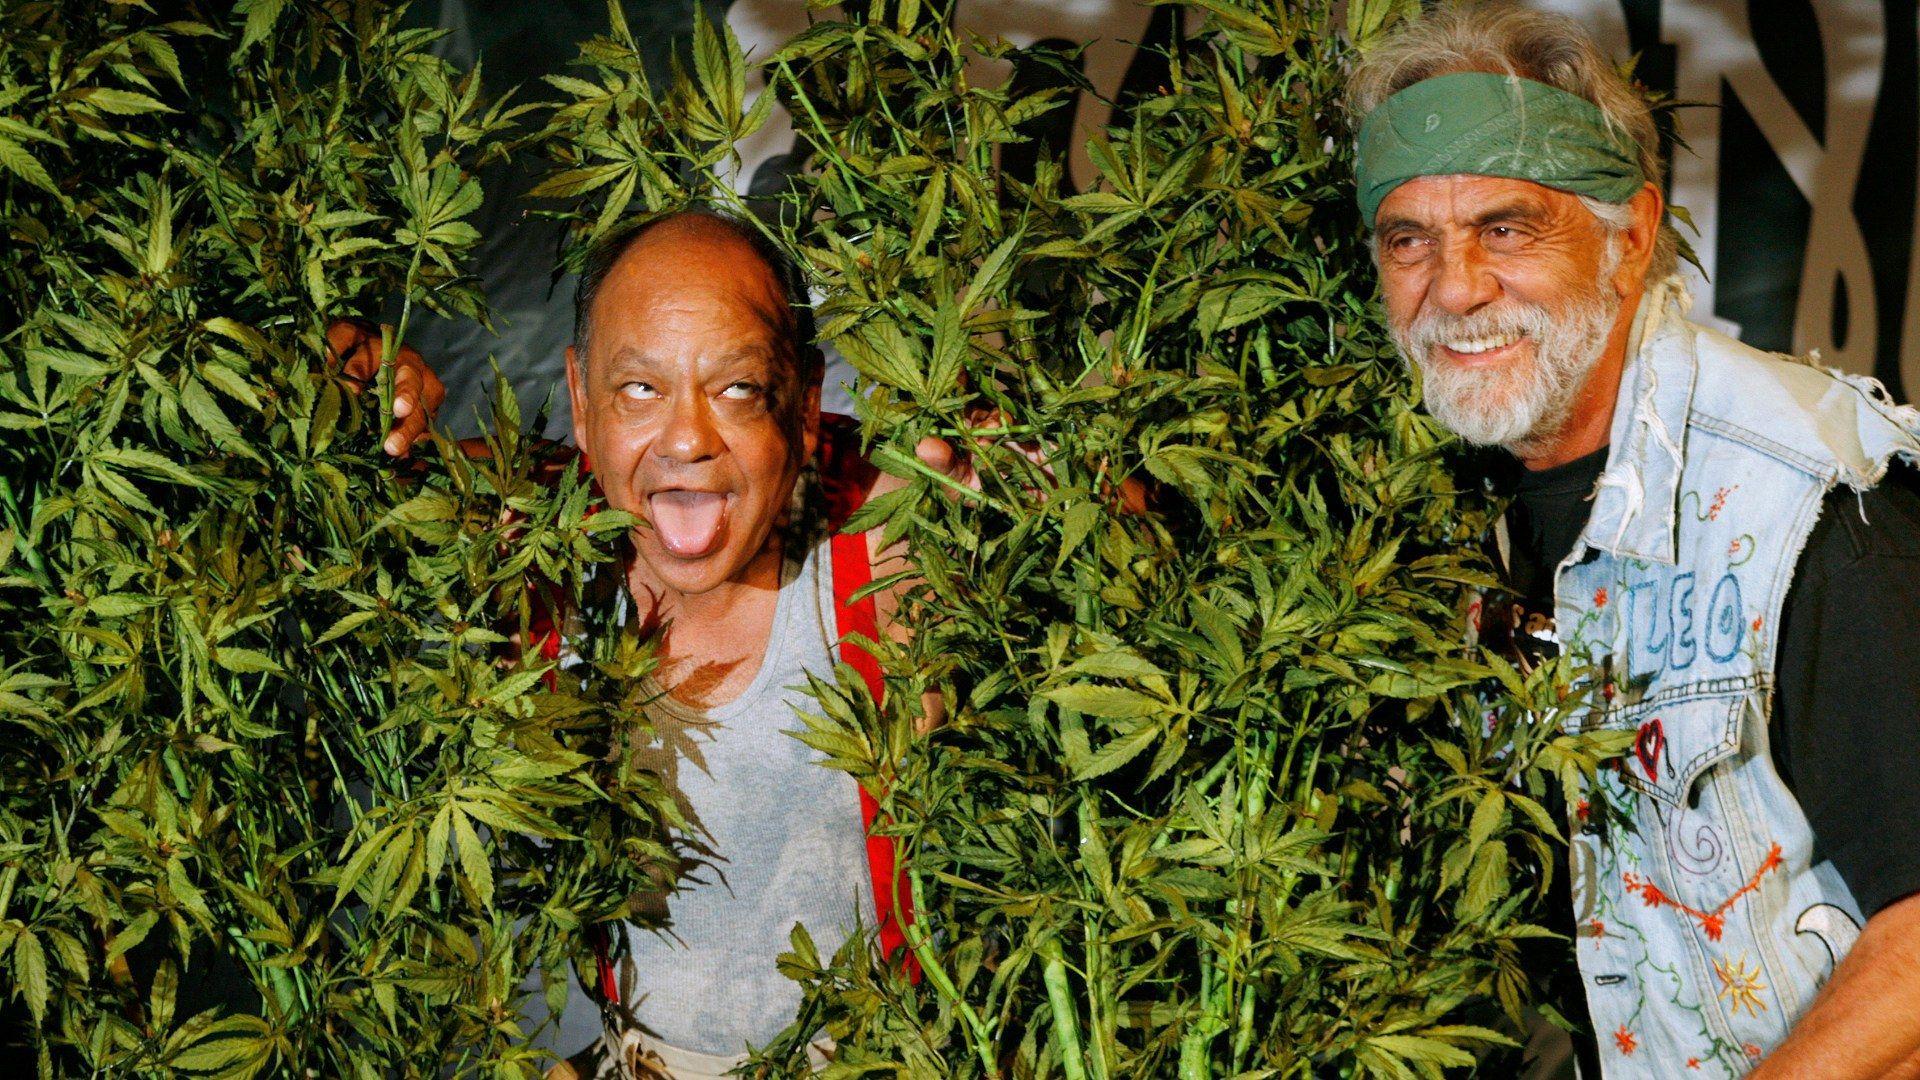 Cheech and Chong Announce First Film Together in Over 30 Years